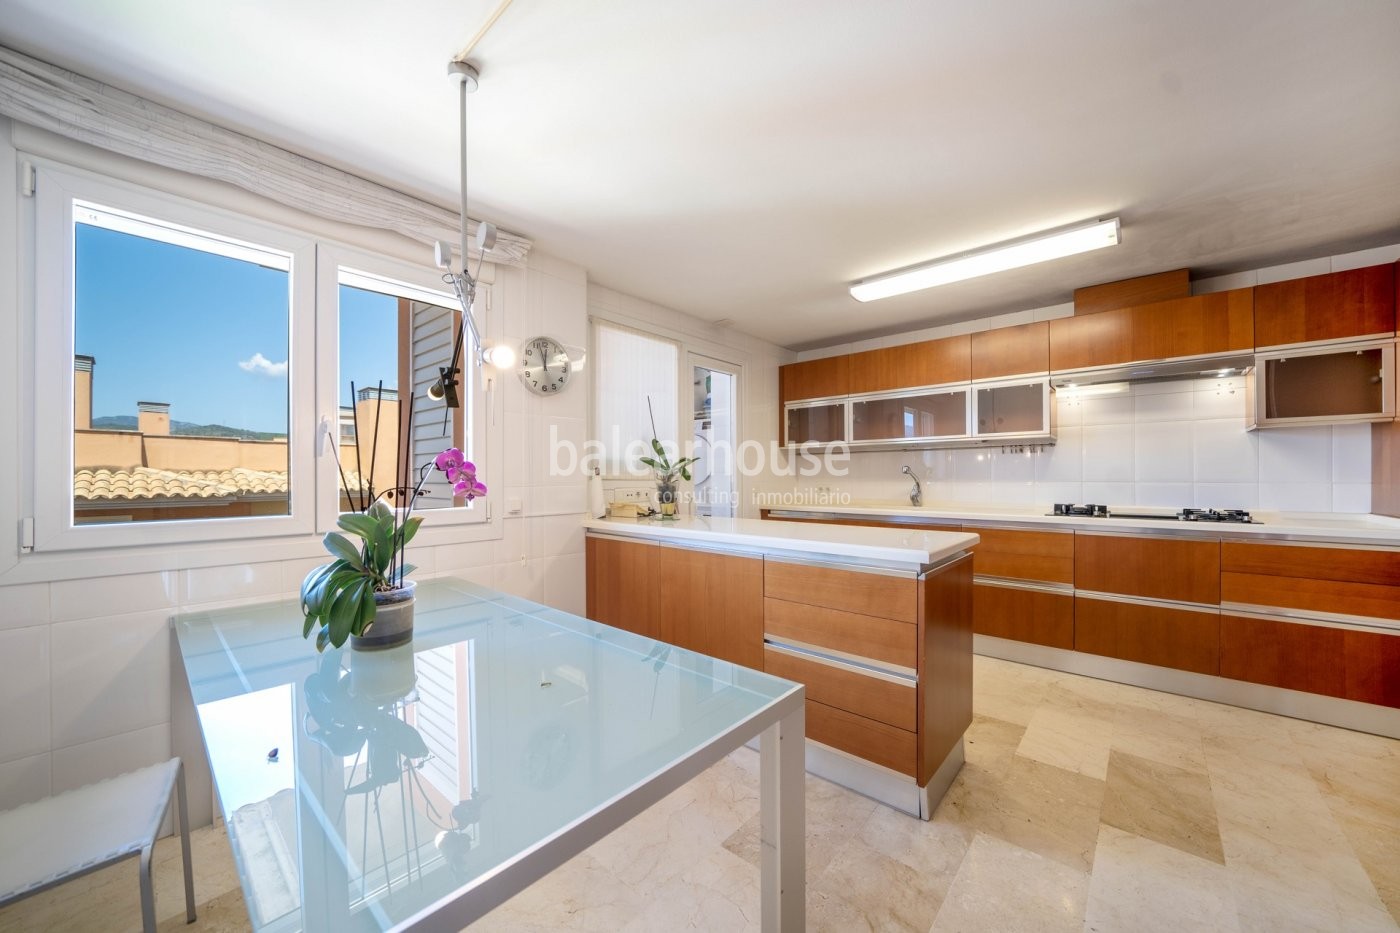 Large penthouse with terraces, private solarium and high qualities in green surroundings of Palma.